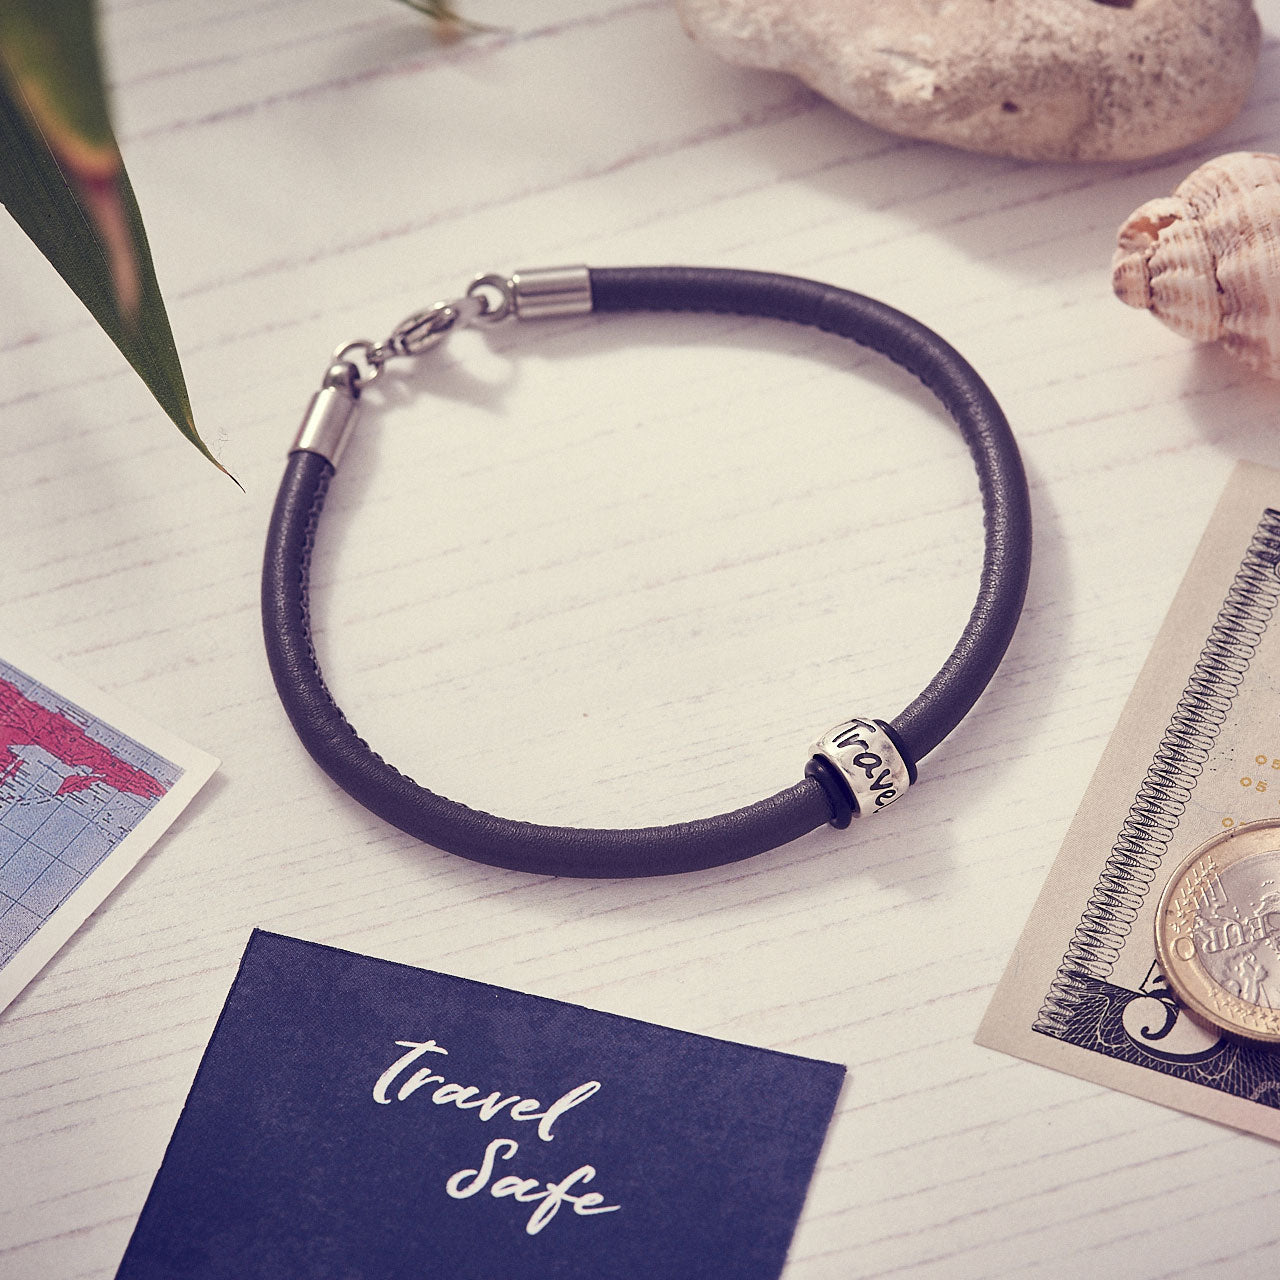 Travel Safe Silver & Italian Stitched Leather Bracelet Black - alternative travel gift from Off The map Brighton